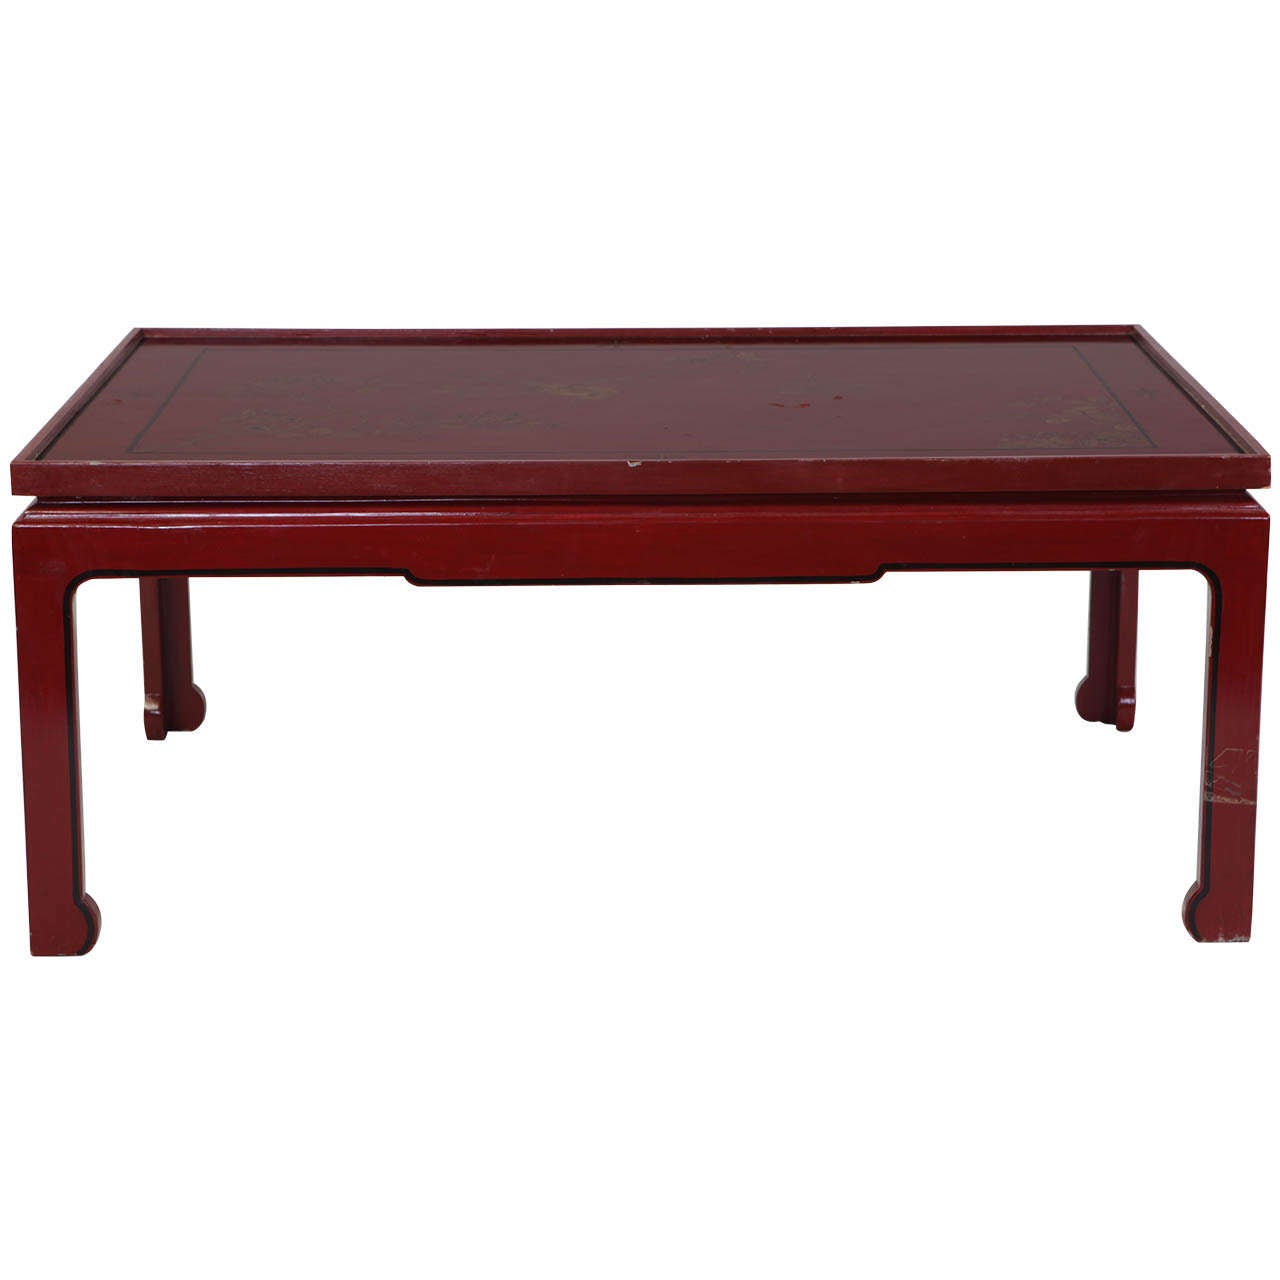 Square Red Lacquered Coffee Table